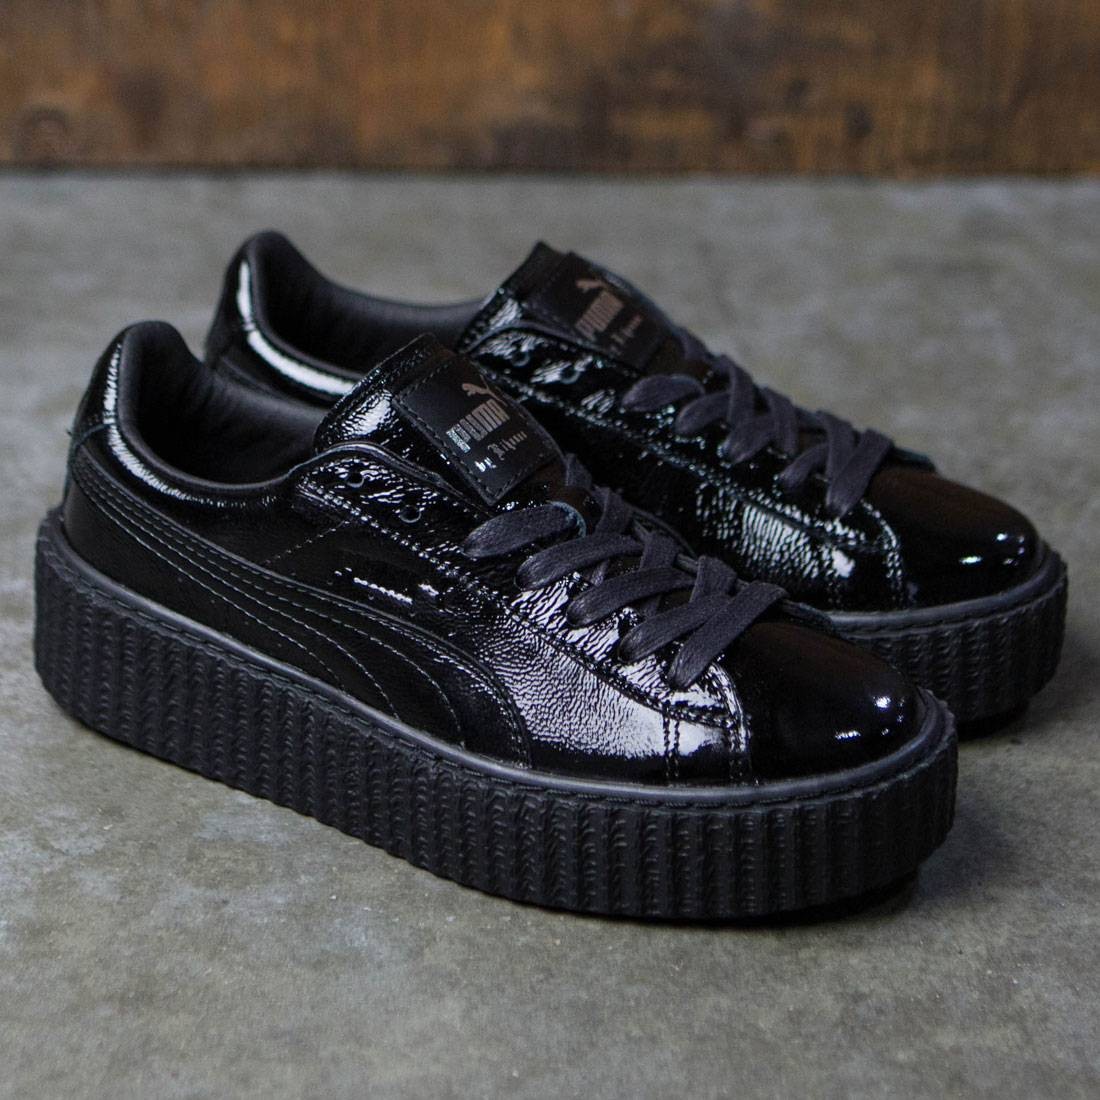 puma x fenty creepers in crackled leather